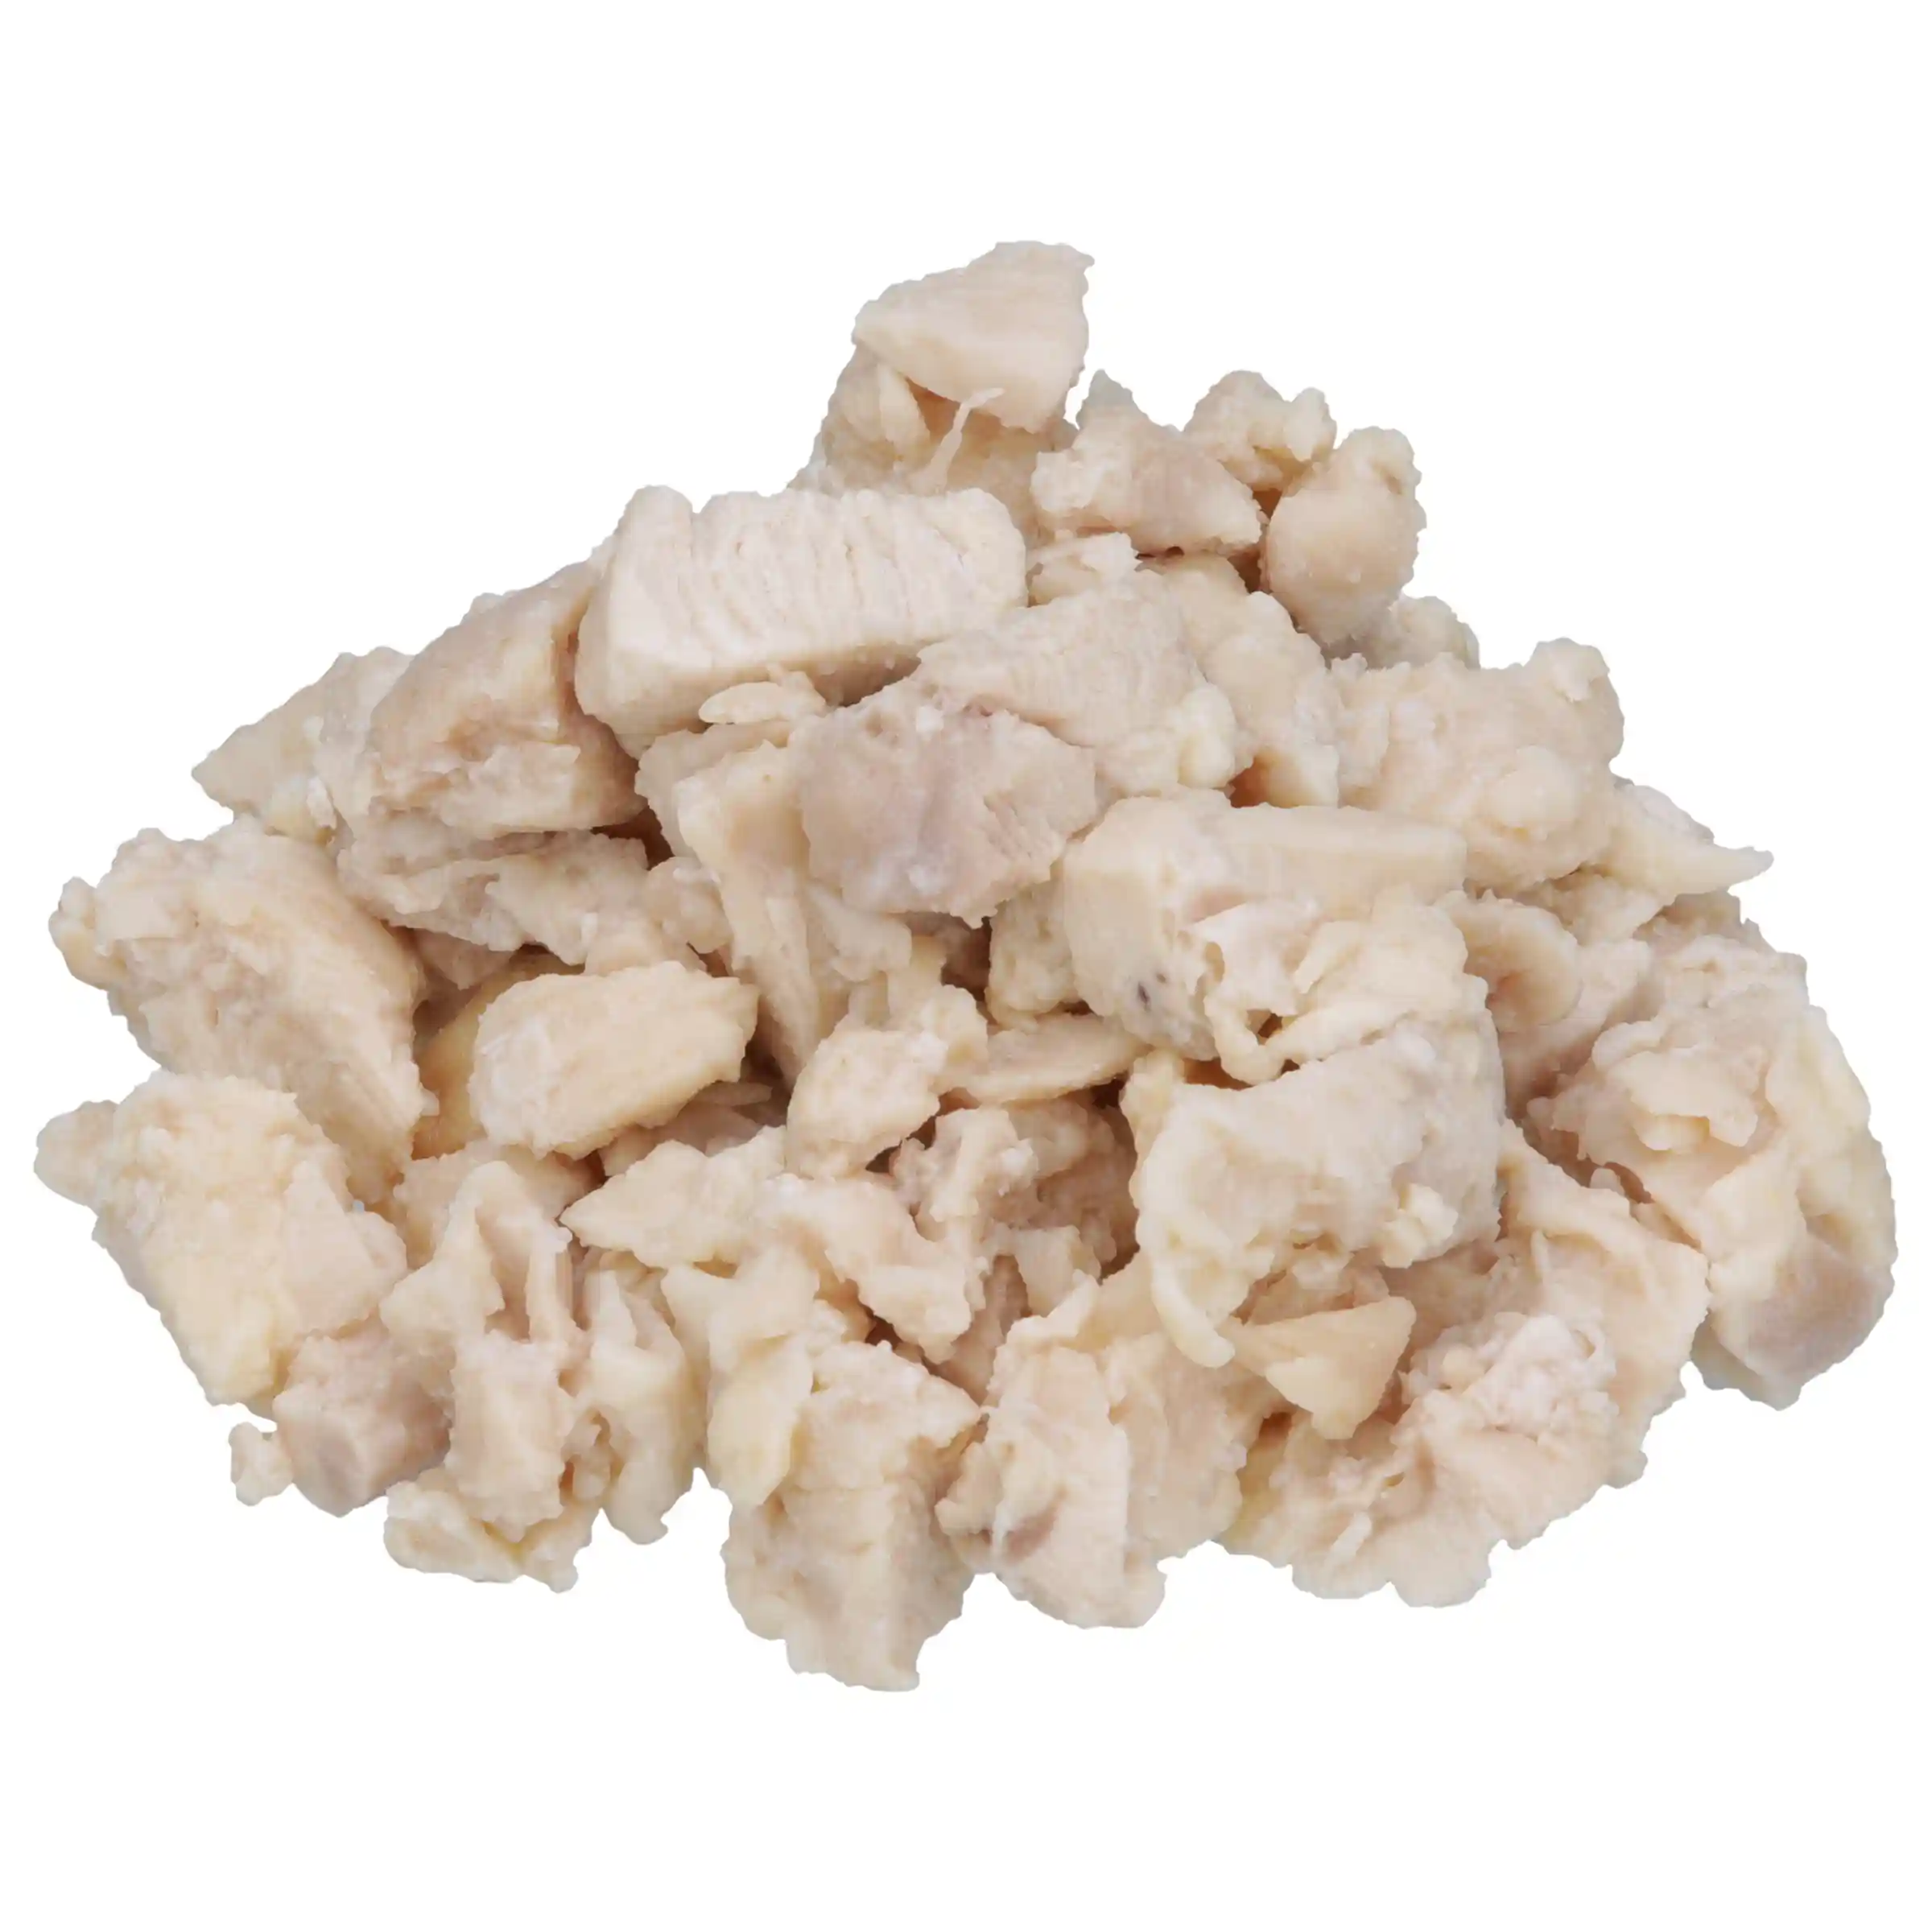 Tyson® Fully Cooked All Natural* Low Sodium Diced Chicken, Natural Proportion 60 White/40 Dark Meat, 0.5"_image_11